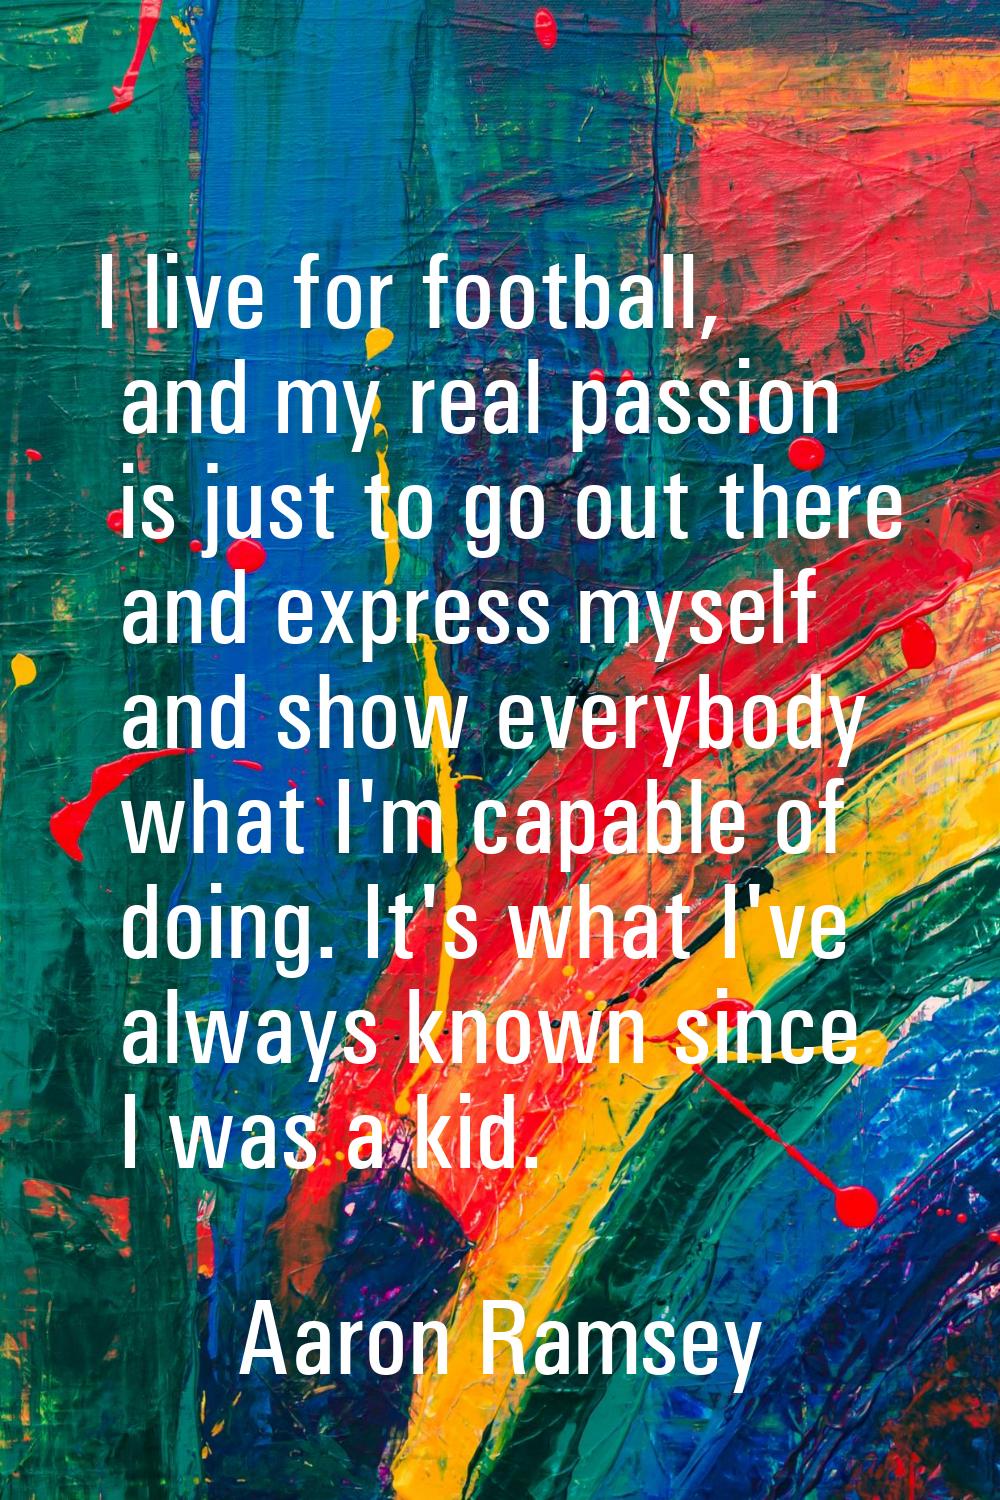 I live for football, and my real passion is just to go out there and express myself and show everyb